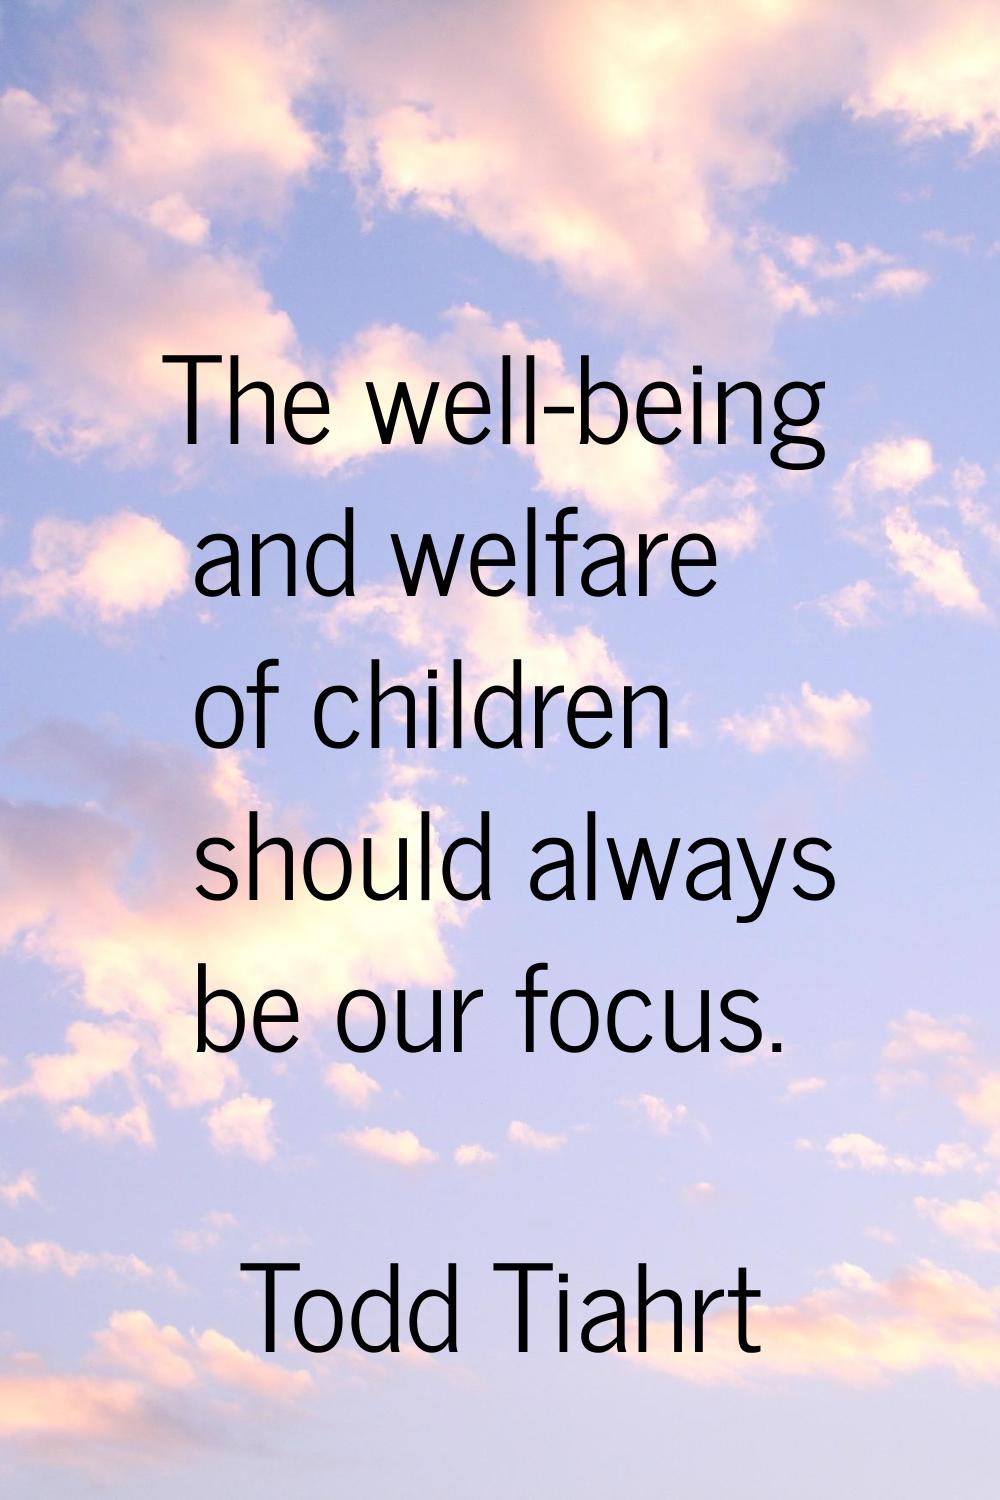 The well-being and welfare of children should always be our focus.